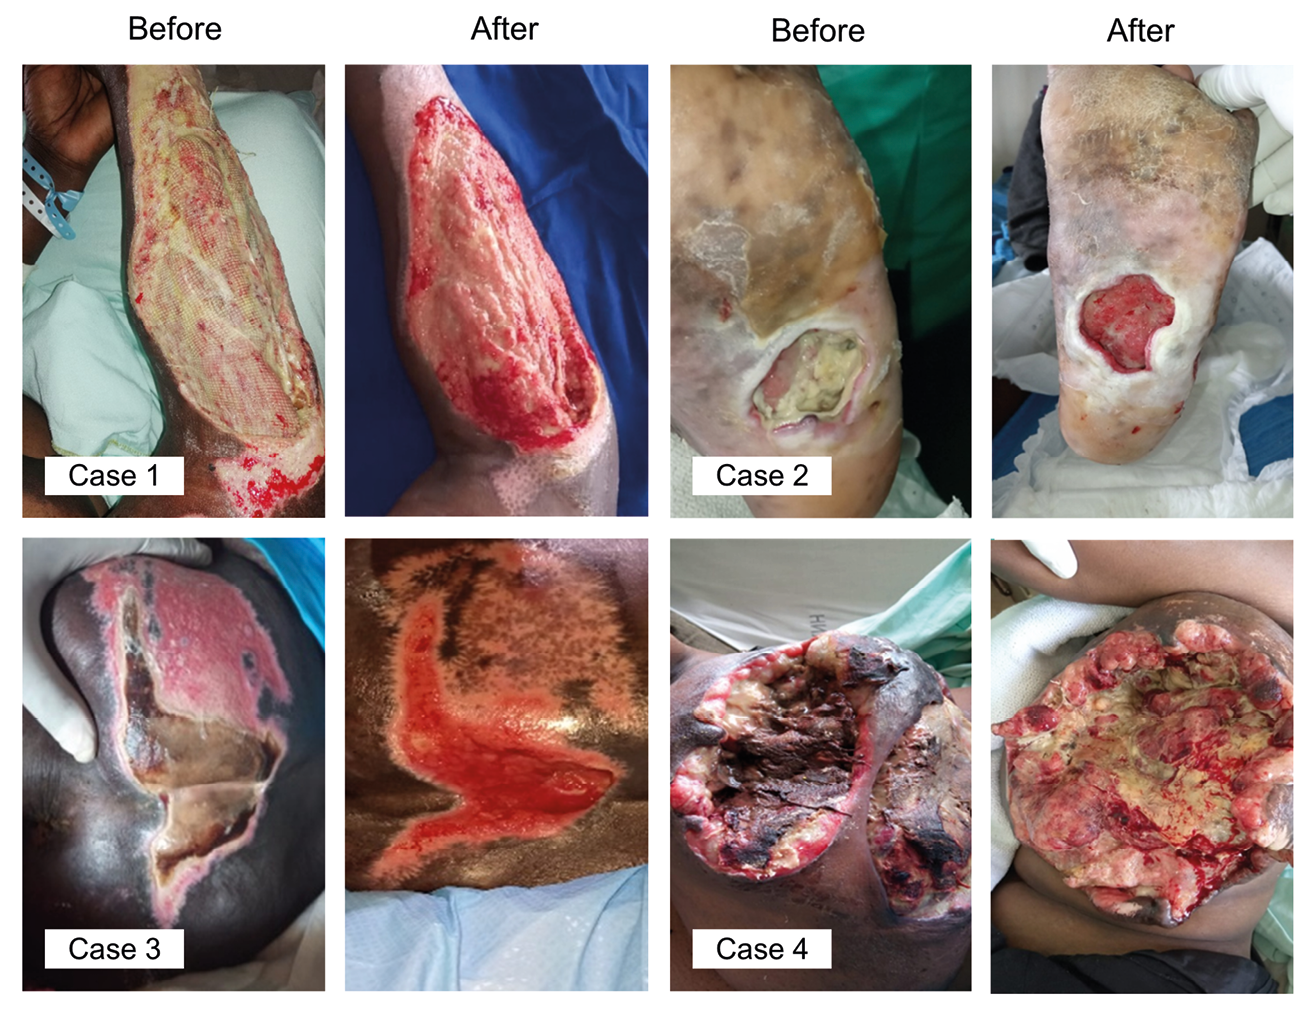 Eight photographs of four wounds treated with maggot therapy in Kenya. For each wound, one image shows the wound before treatment and one after. The caption provides case descriptions.